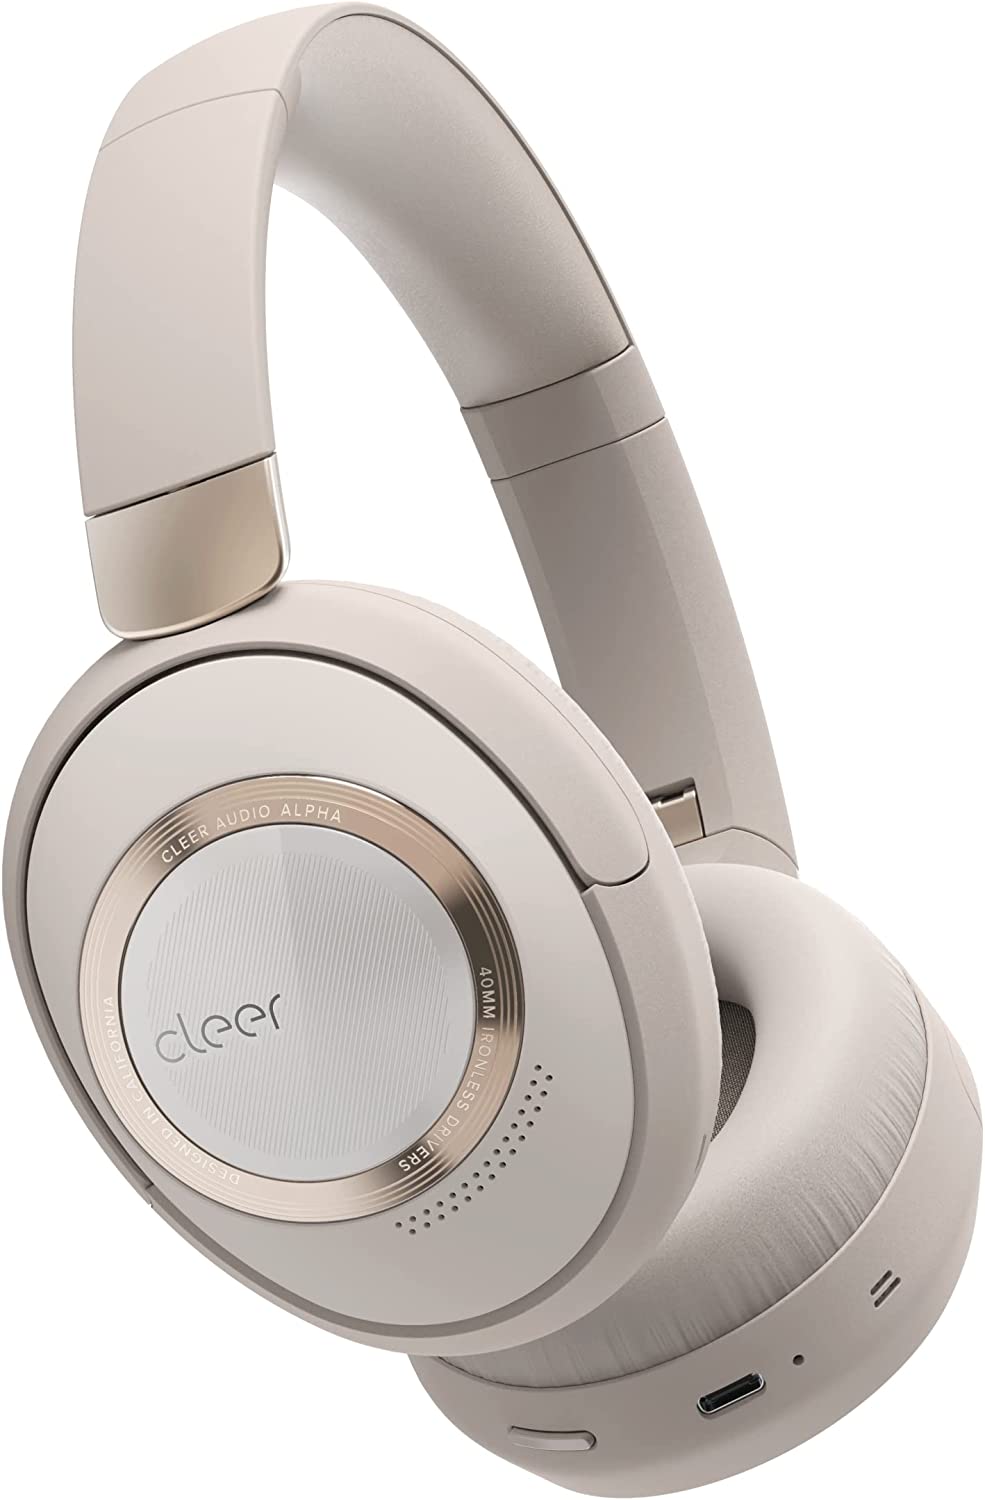 Cleer Audio, Alpha Noise Cancelling Bluetooth Headphones, Microphone, Outer Touch Controls, 35 Hr Battery Life, Stone